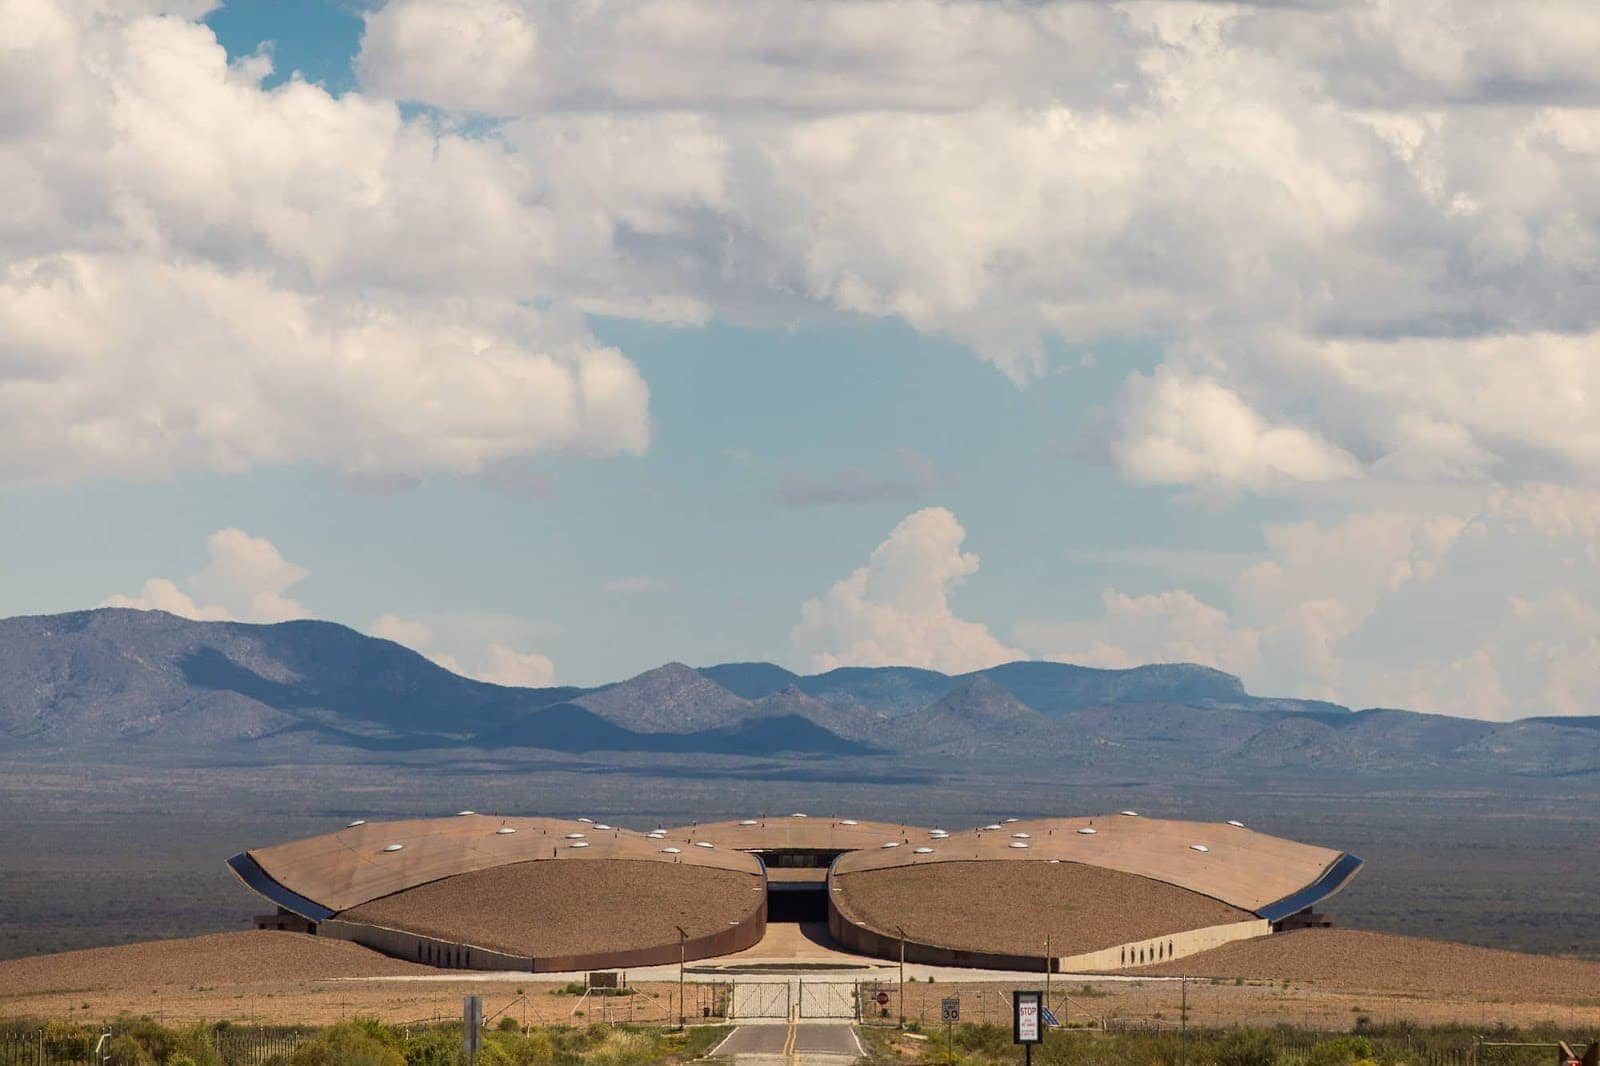 Spaceport America%252C New Mexico by Laurence Norah